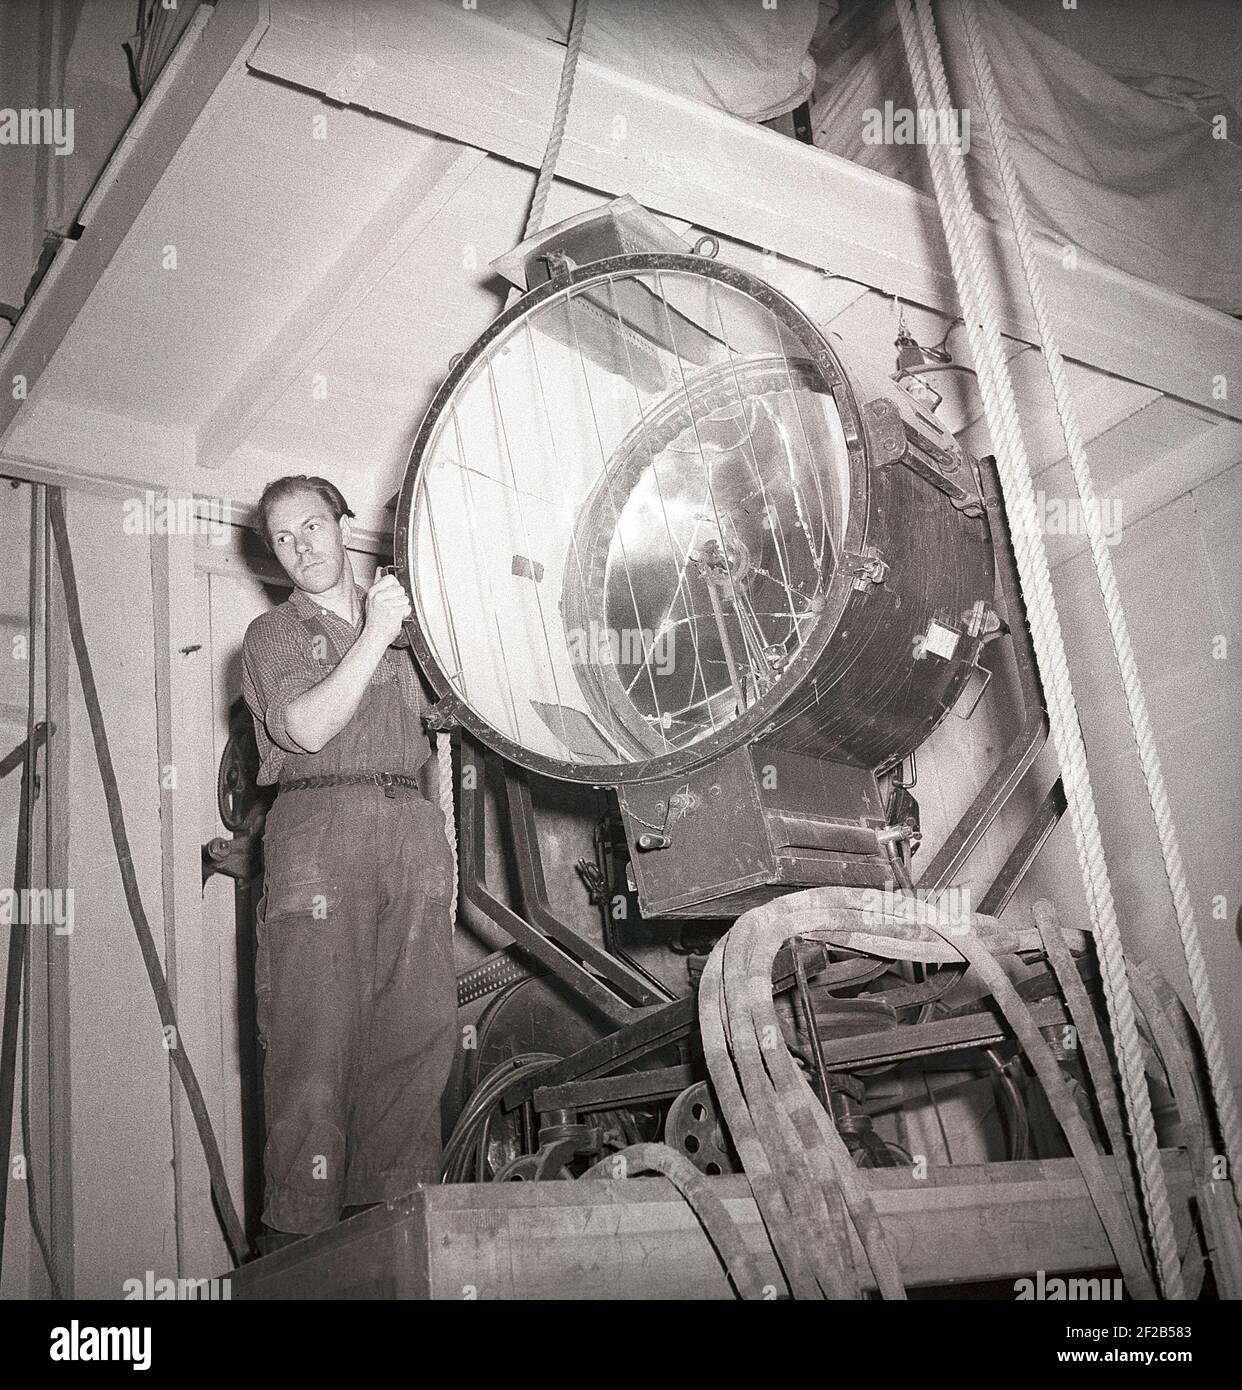 Film studio in the 1940s. A man working on the film set handles the giant lamp that is used to light the film scene during taking. Picture taken in the largest filmstudio in Sweden Filmstaden Råsunda during filming of Ingmar Bergmans movie Woman without a face. It had premiere september 16 1947.  Sweden 1947. ref AB5-10 Stock Photo